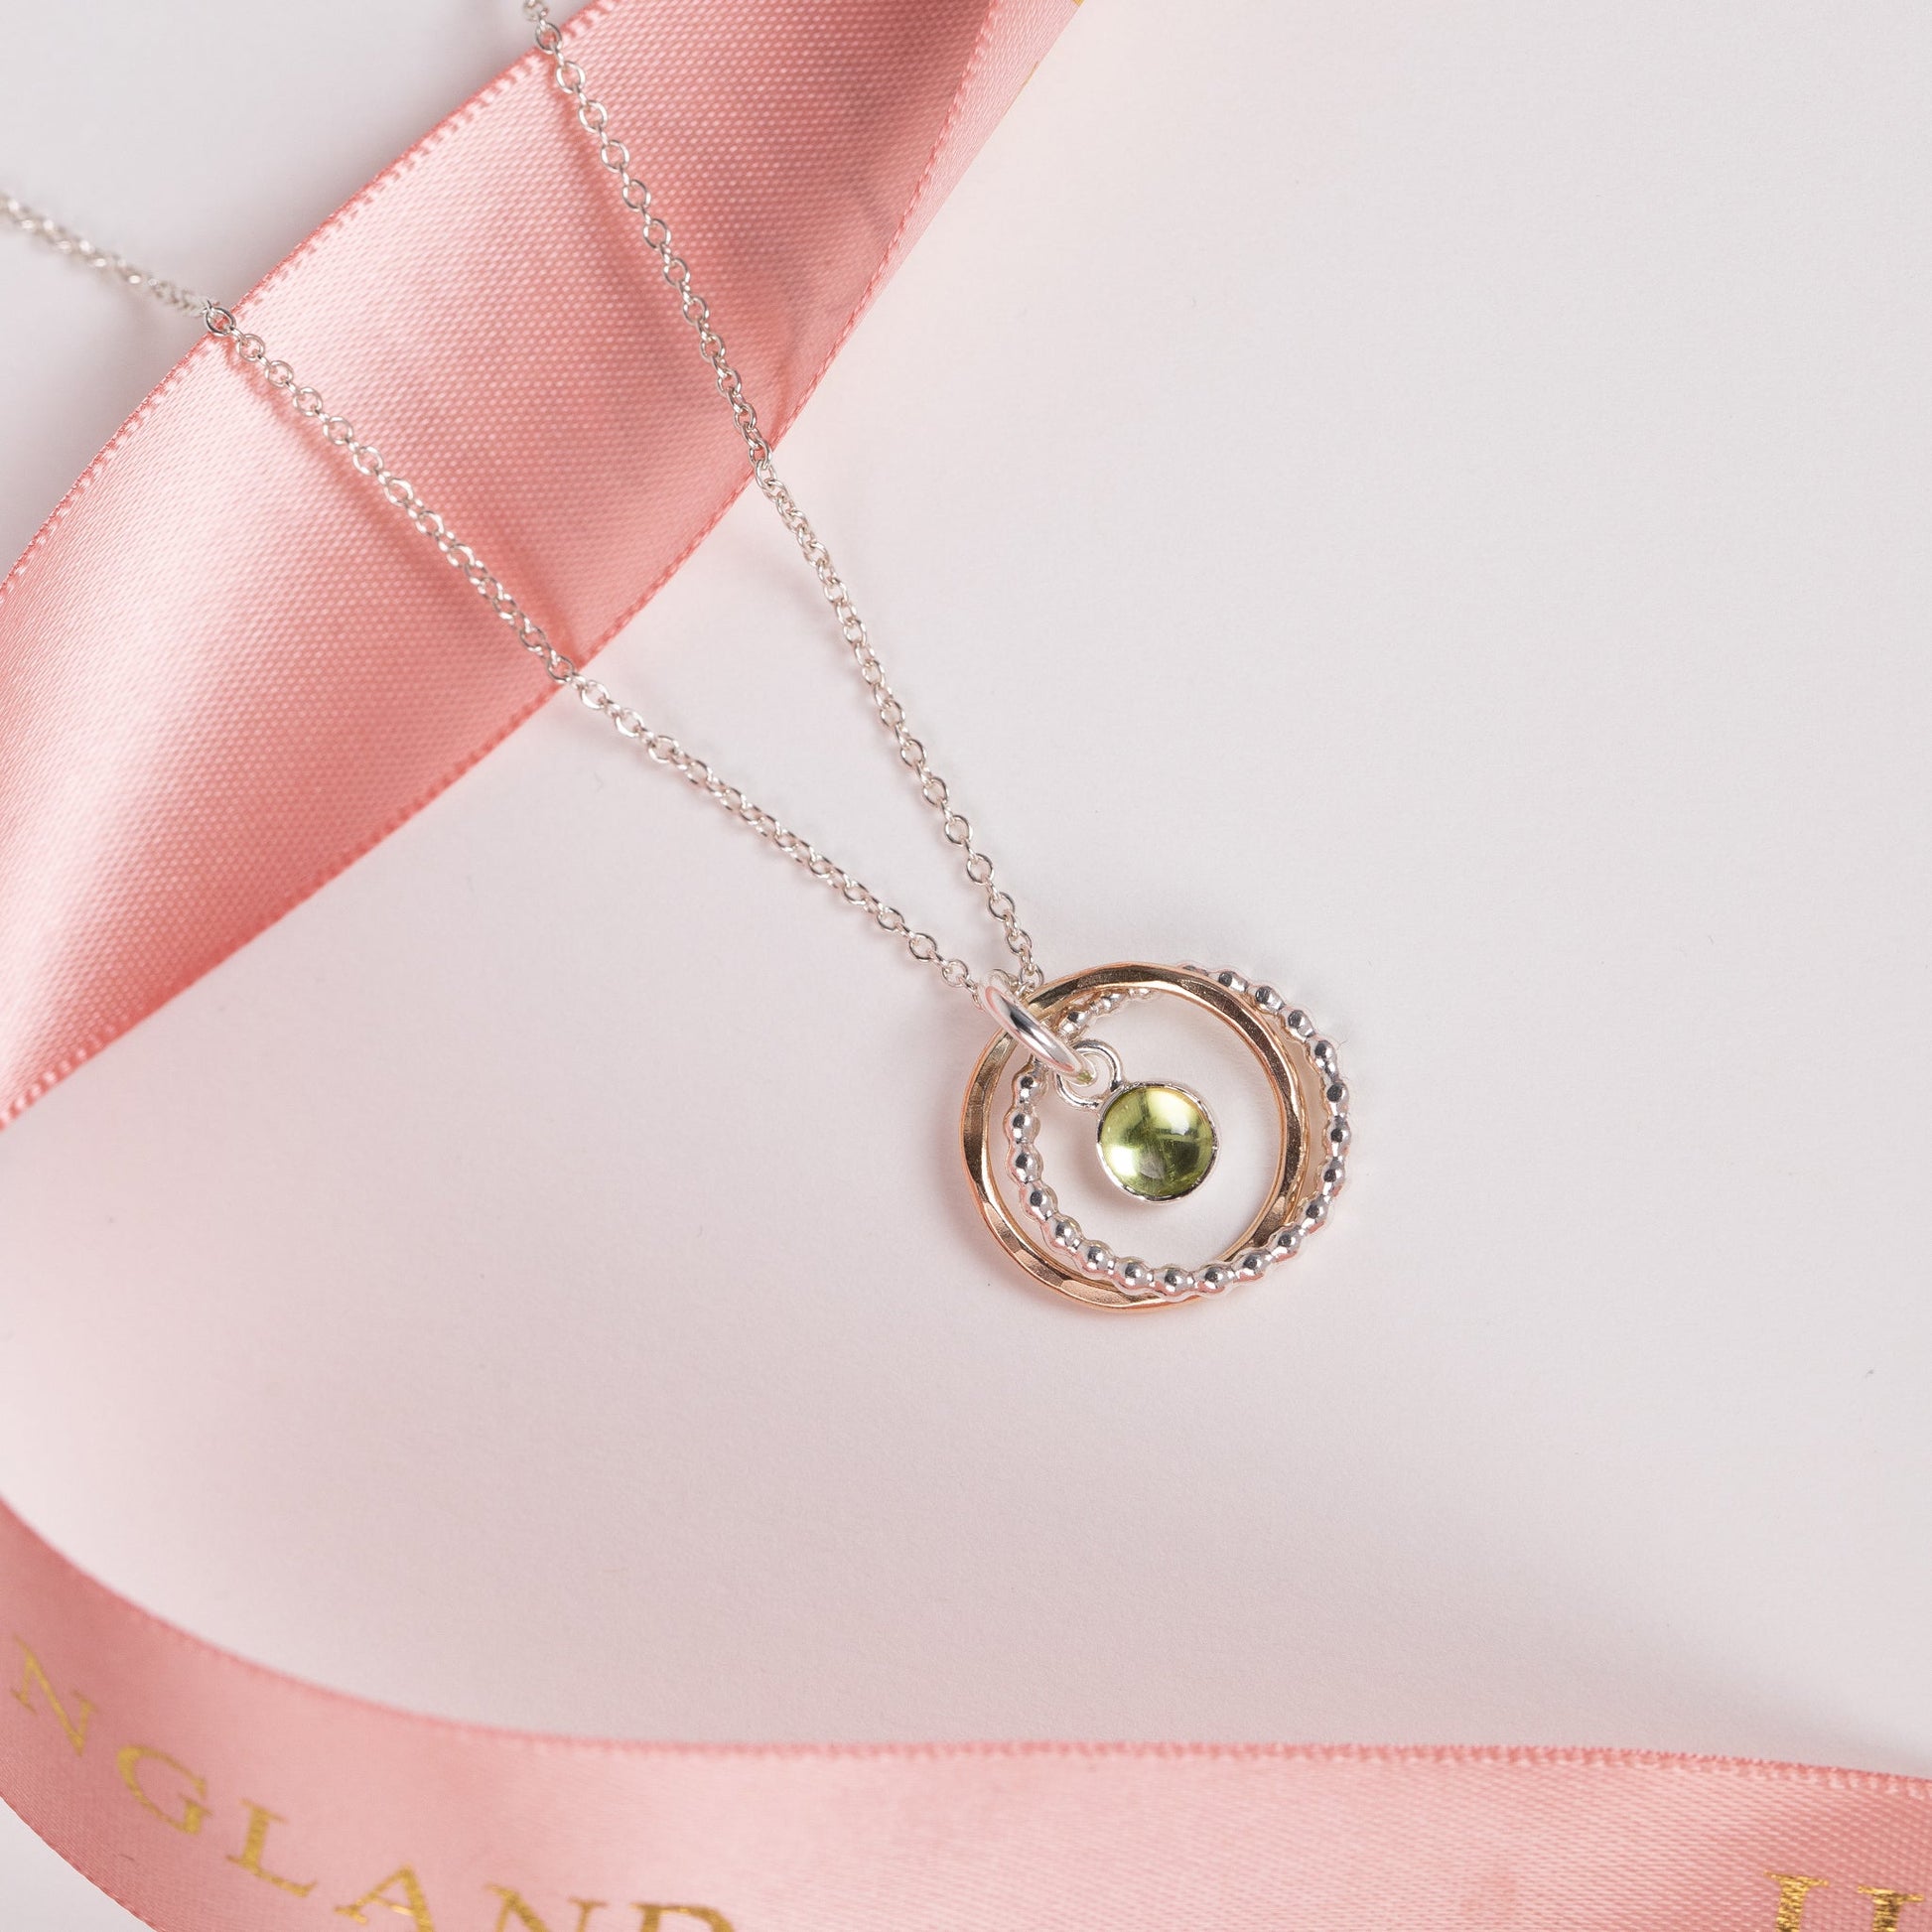 Gift for Friend - Peridot Friendship Necklace - Silver & Gold